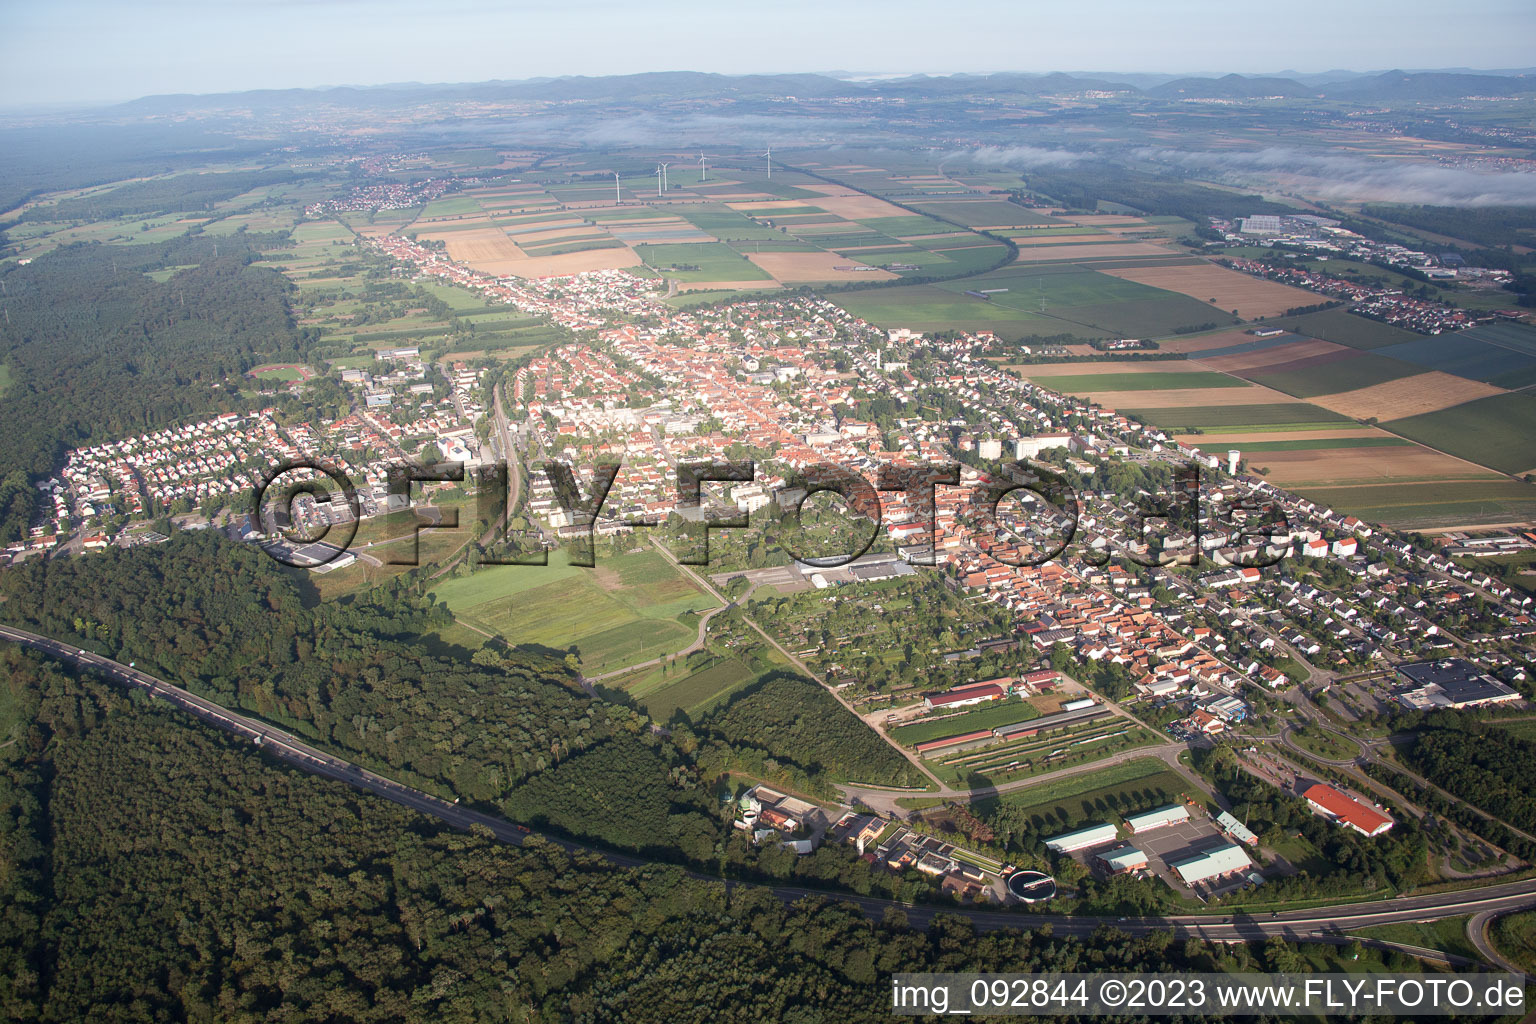 Drone recording of Kandel in the state Rhineland-Palatinate, Germany